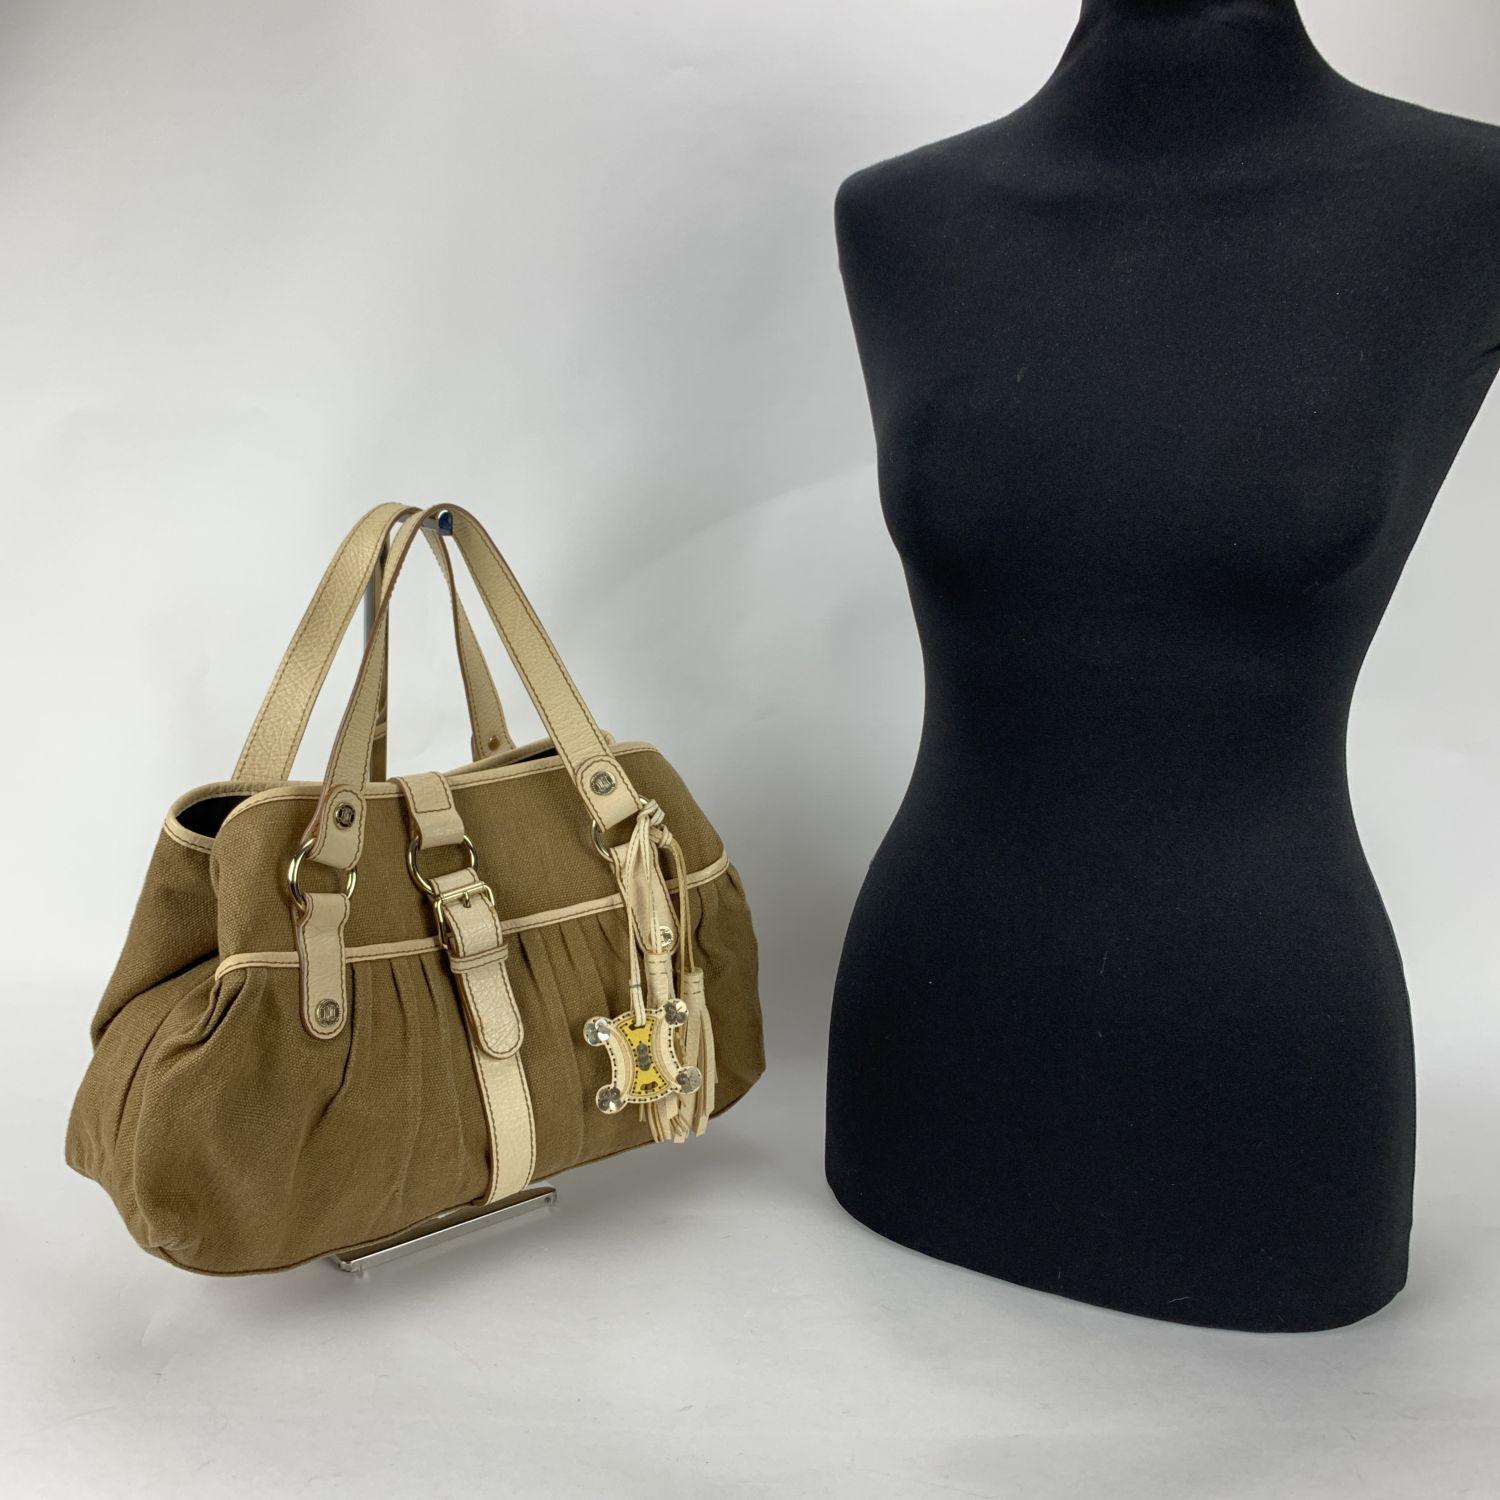 Celine Brown Canvas Duffel tote bag with beige genuine leather handles and trim. Pleats detailing on the front. Fold-over strap with magnetic button closure. Tassels and Macadam pendants.Canvas lining. 1 side zip pocket and 1 side open pocket